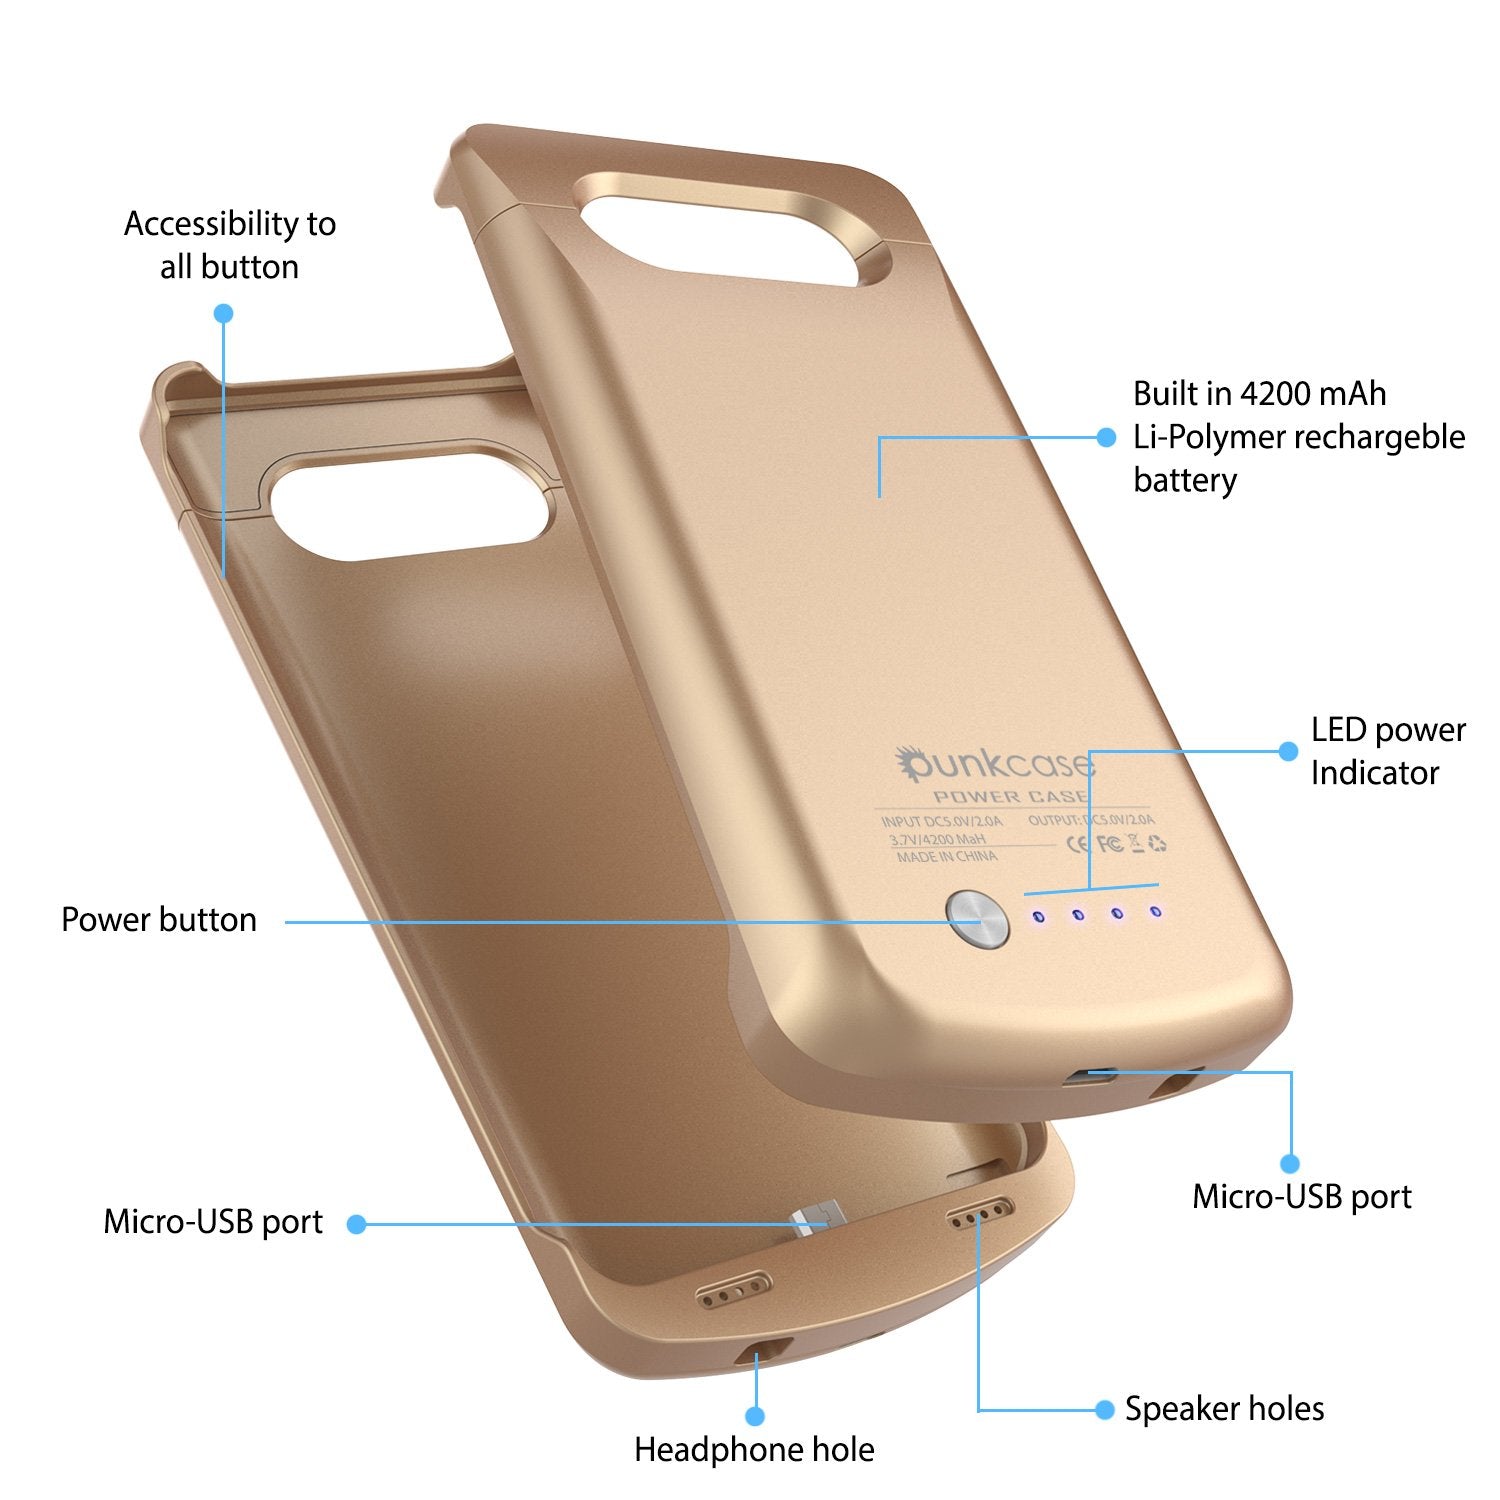 Galaxy Note 5 Battery Case, Punkcase 5000mAH Charger Case W/ Screen Protector | Integrated Kickstand & USB Port | IntelSwitch [Gold] - PunkCase NZ